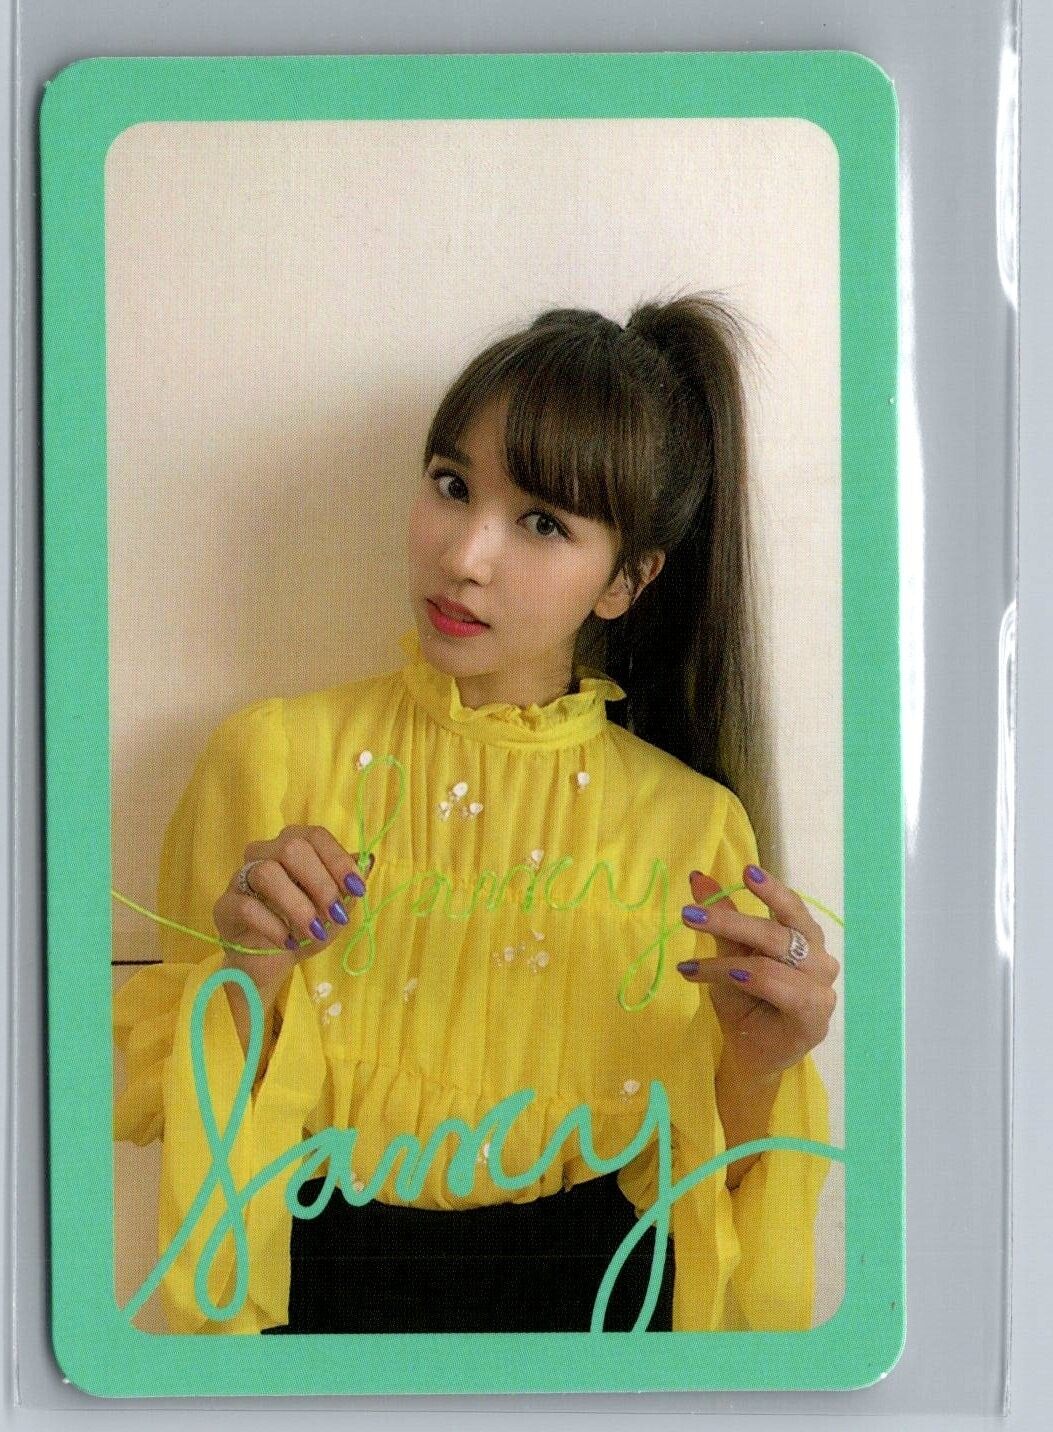 TWICE- MINA FANCY YOU OFFICIAL ALBUM PHOTOCARD (US SELLER)